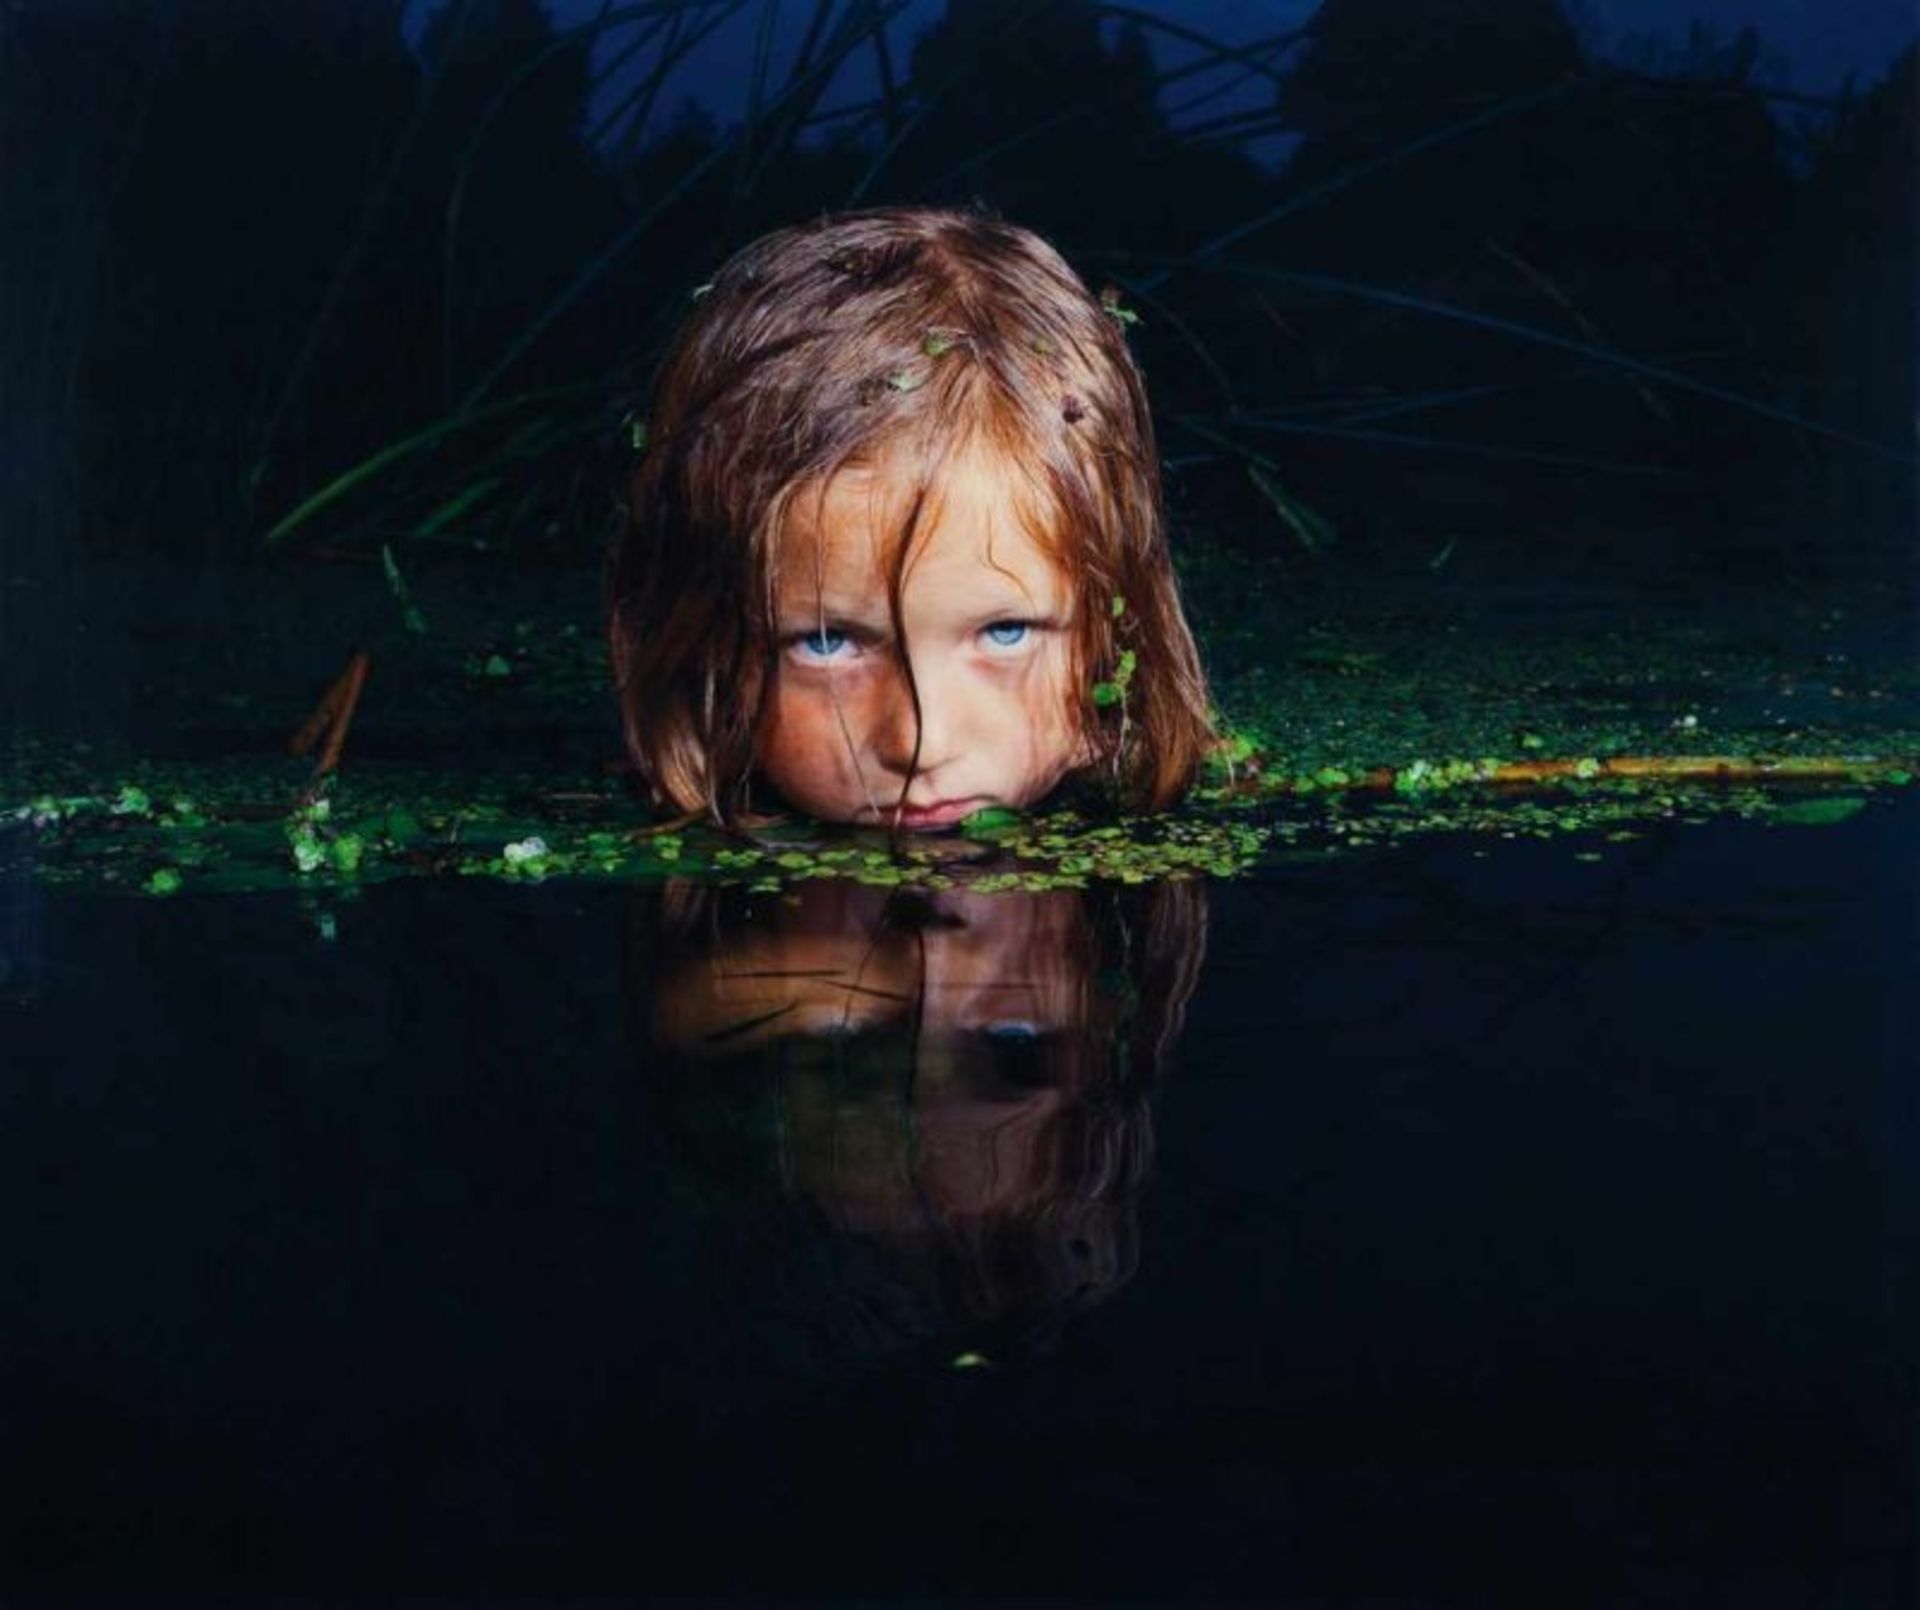 Oleg Kulik (n. 1961) "Girl in the Swamp"From the "Fear" seriesC-print mounted on aluminumEd. 1/